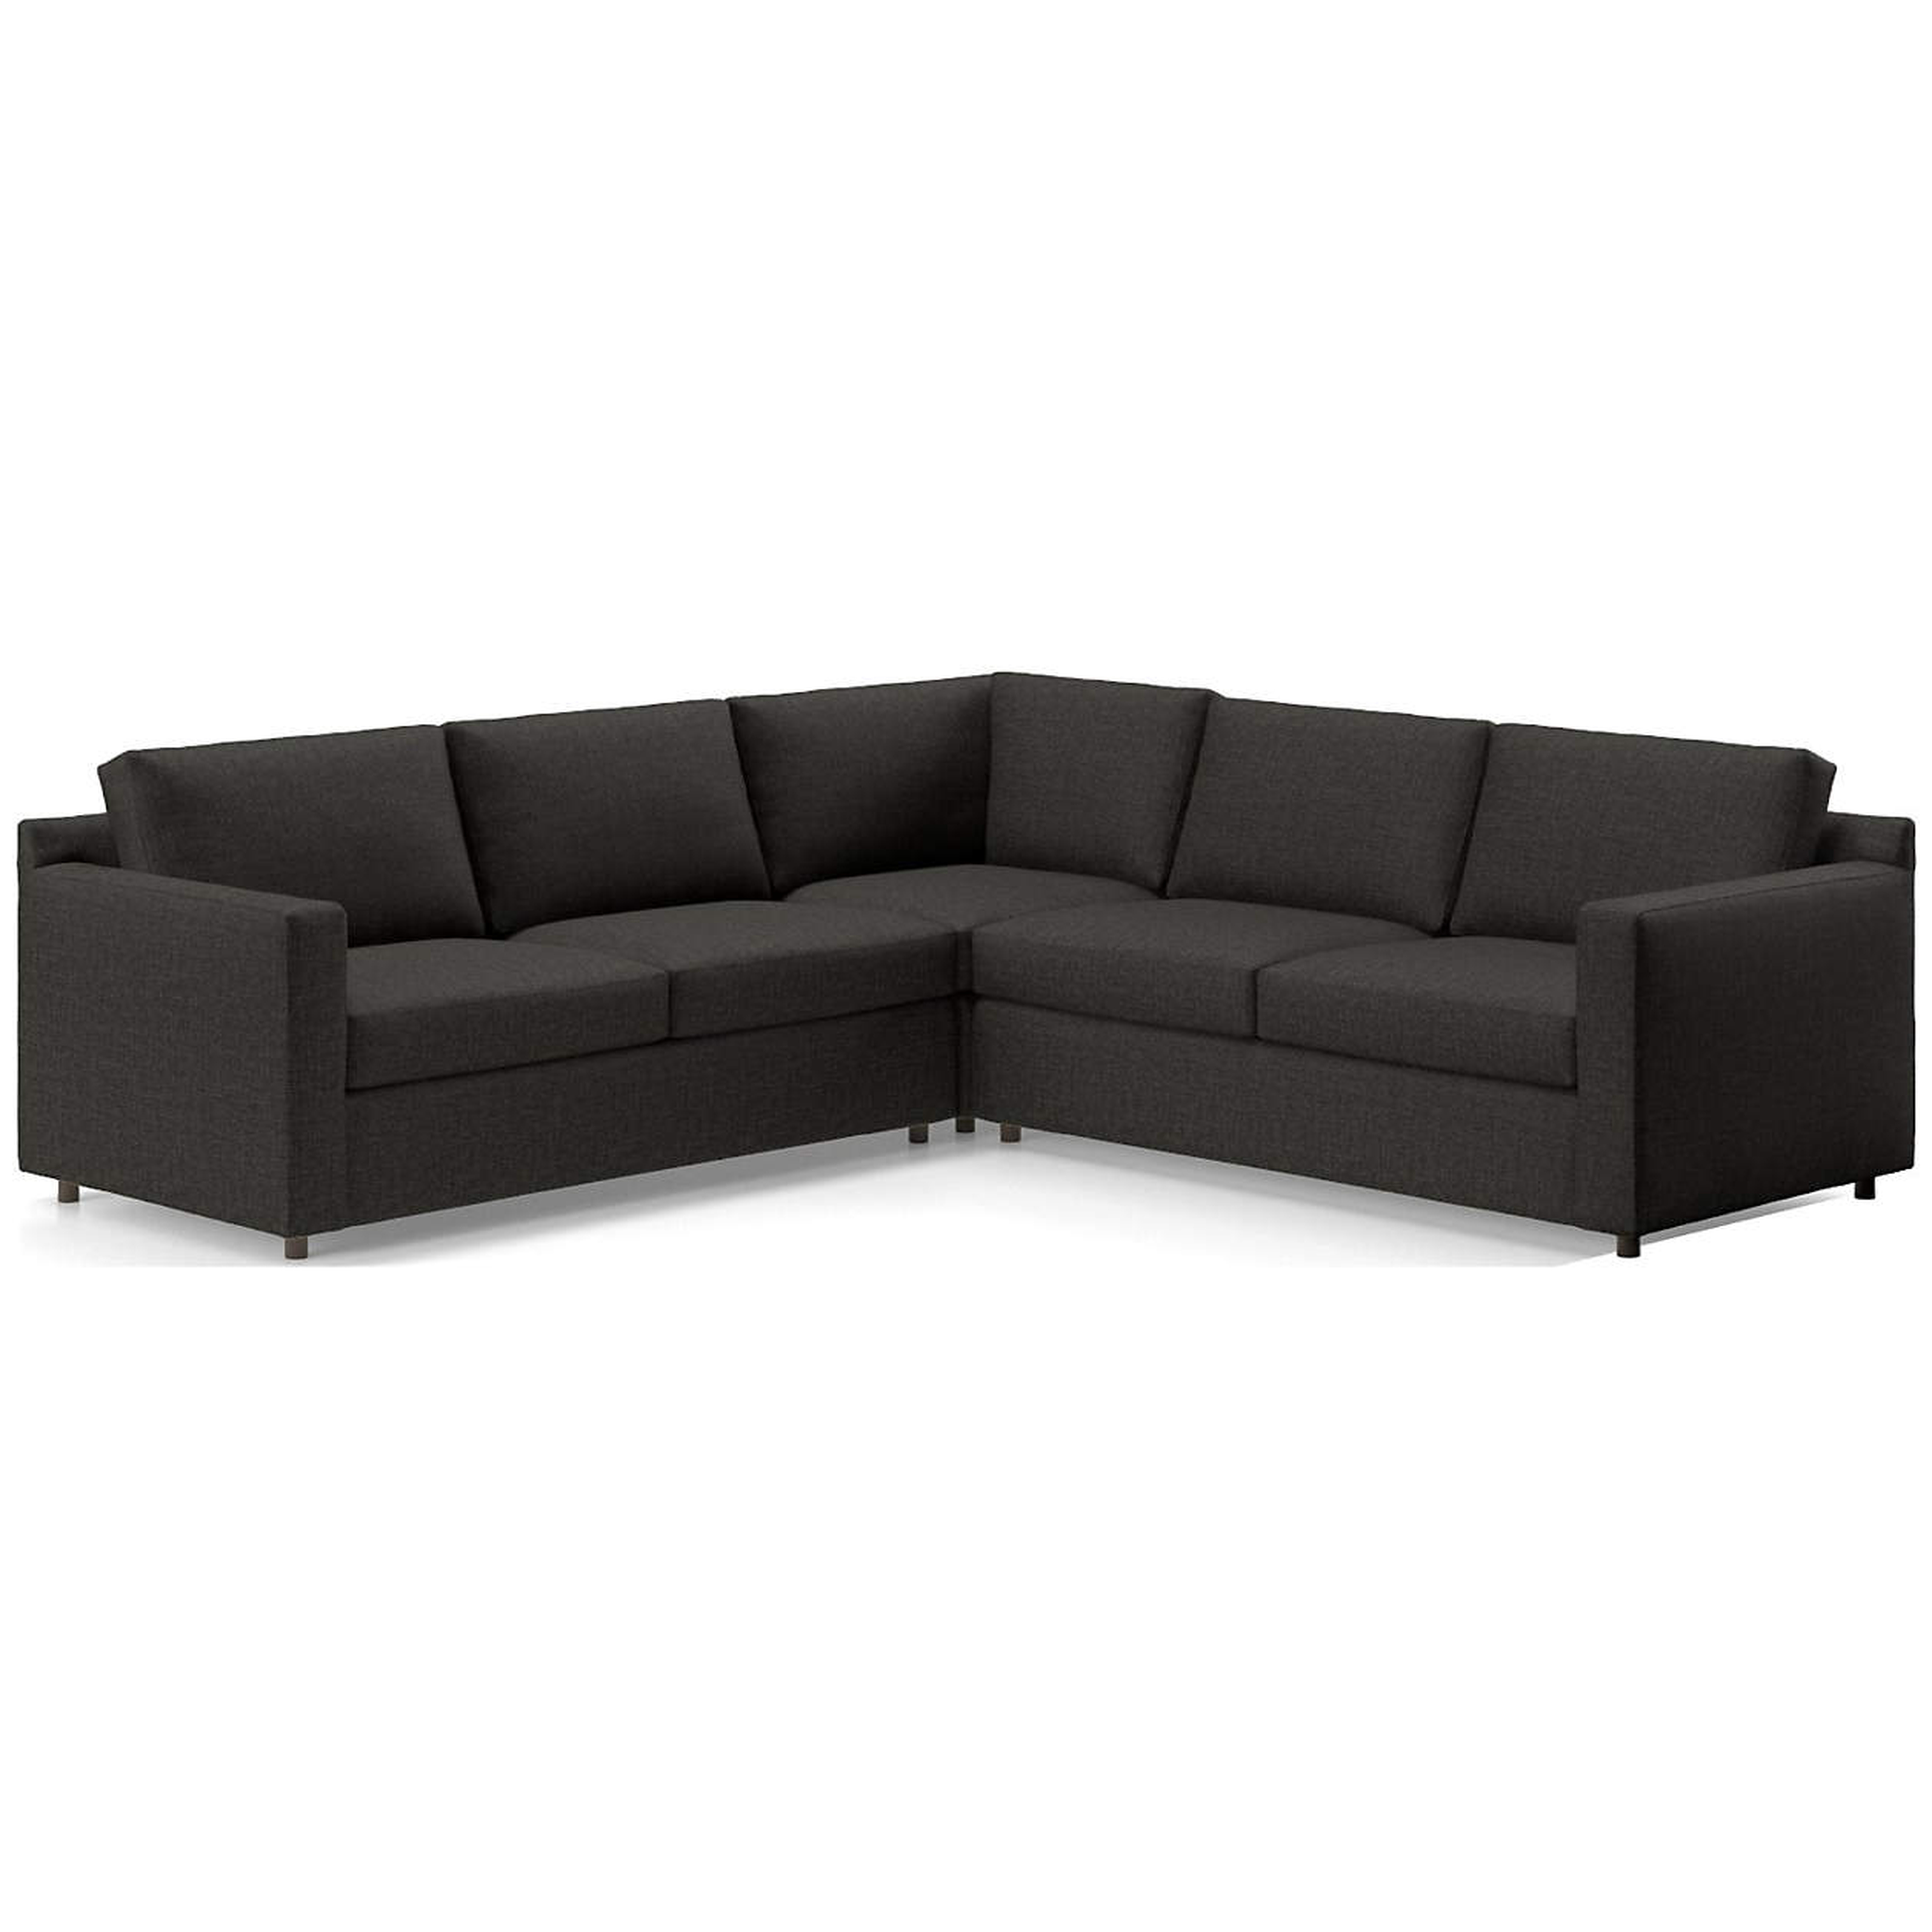 Dryden 3-Piece Corner Sectional - Charcoal - Crate and Barrel